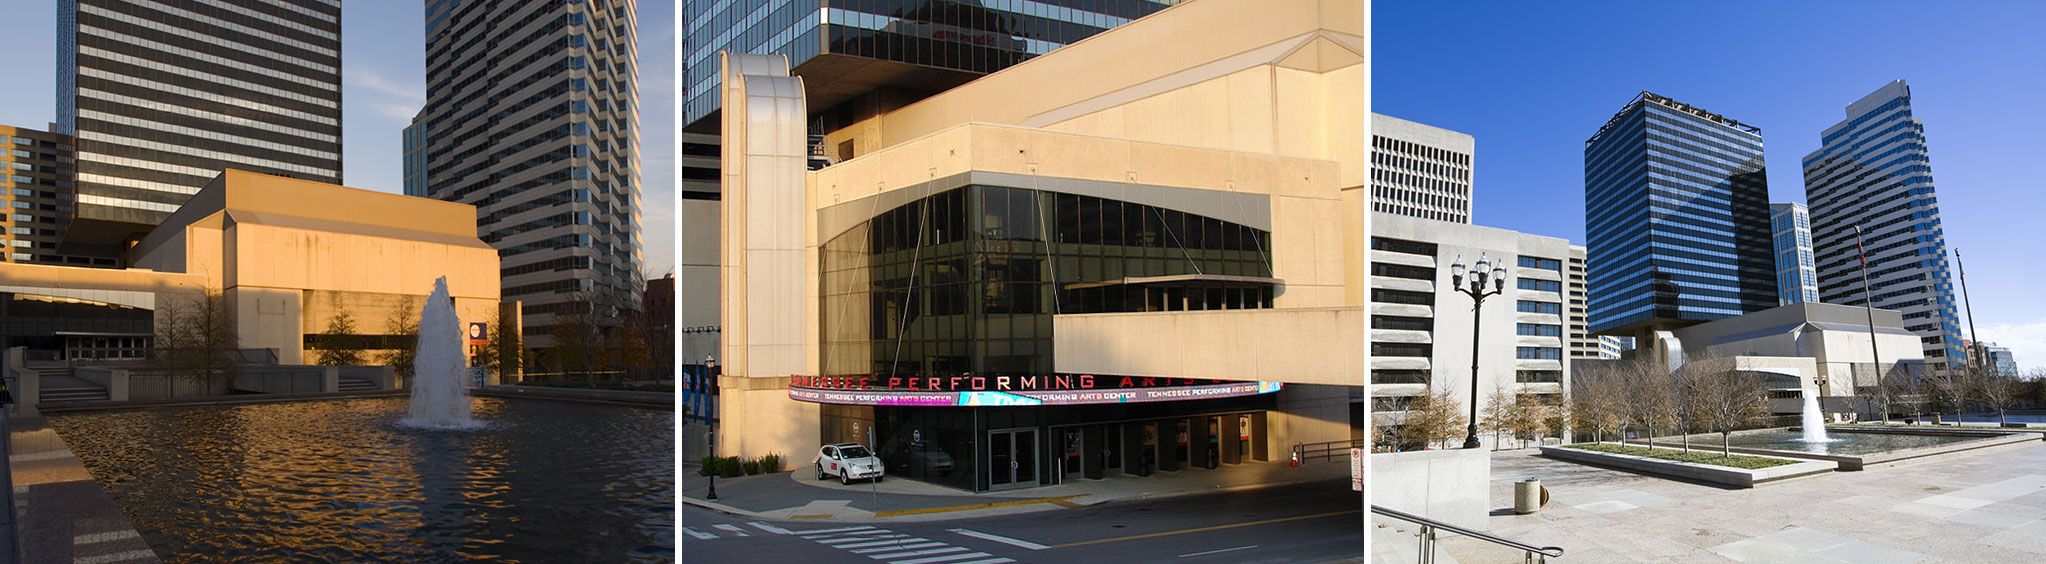 Tennessee Performing Arts Center in Nashville, TN